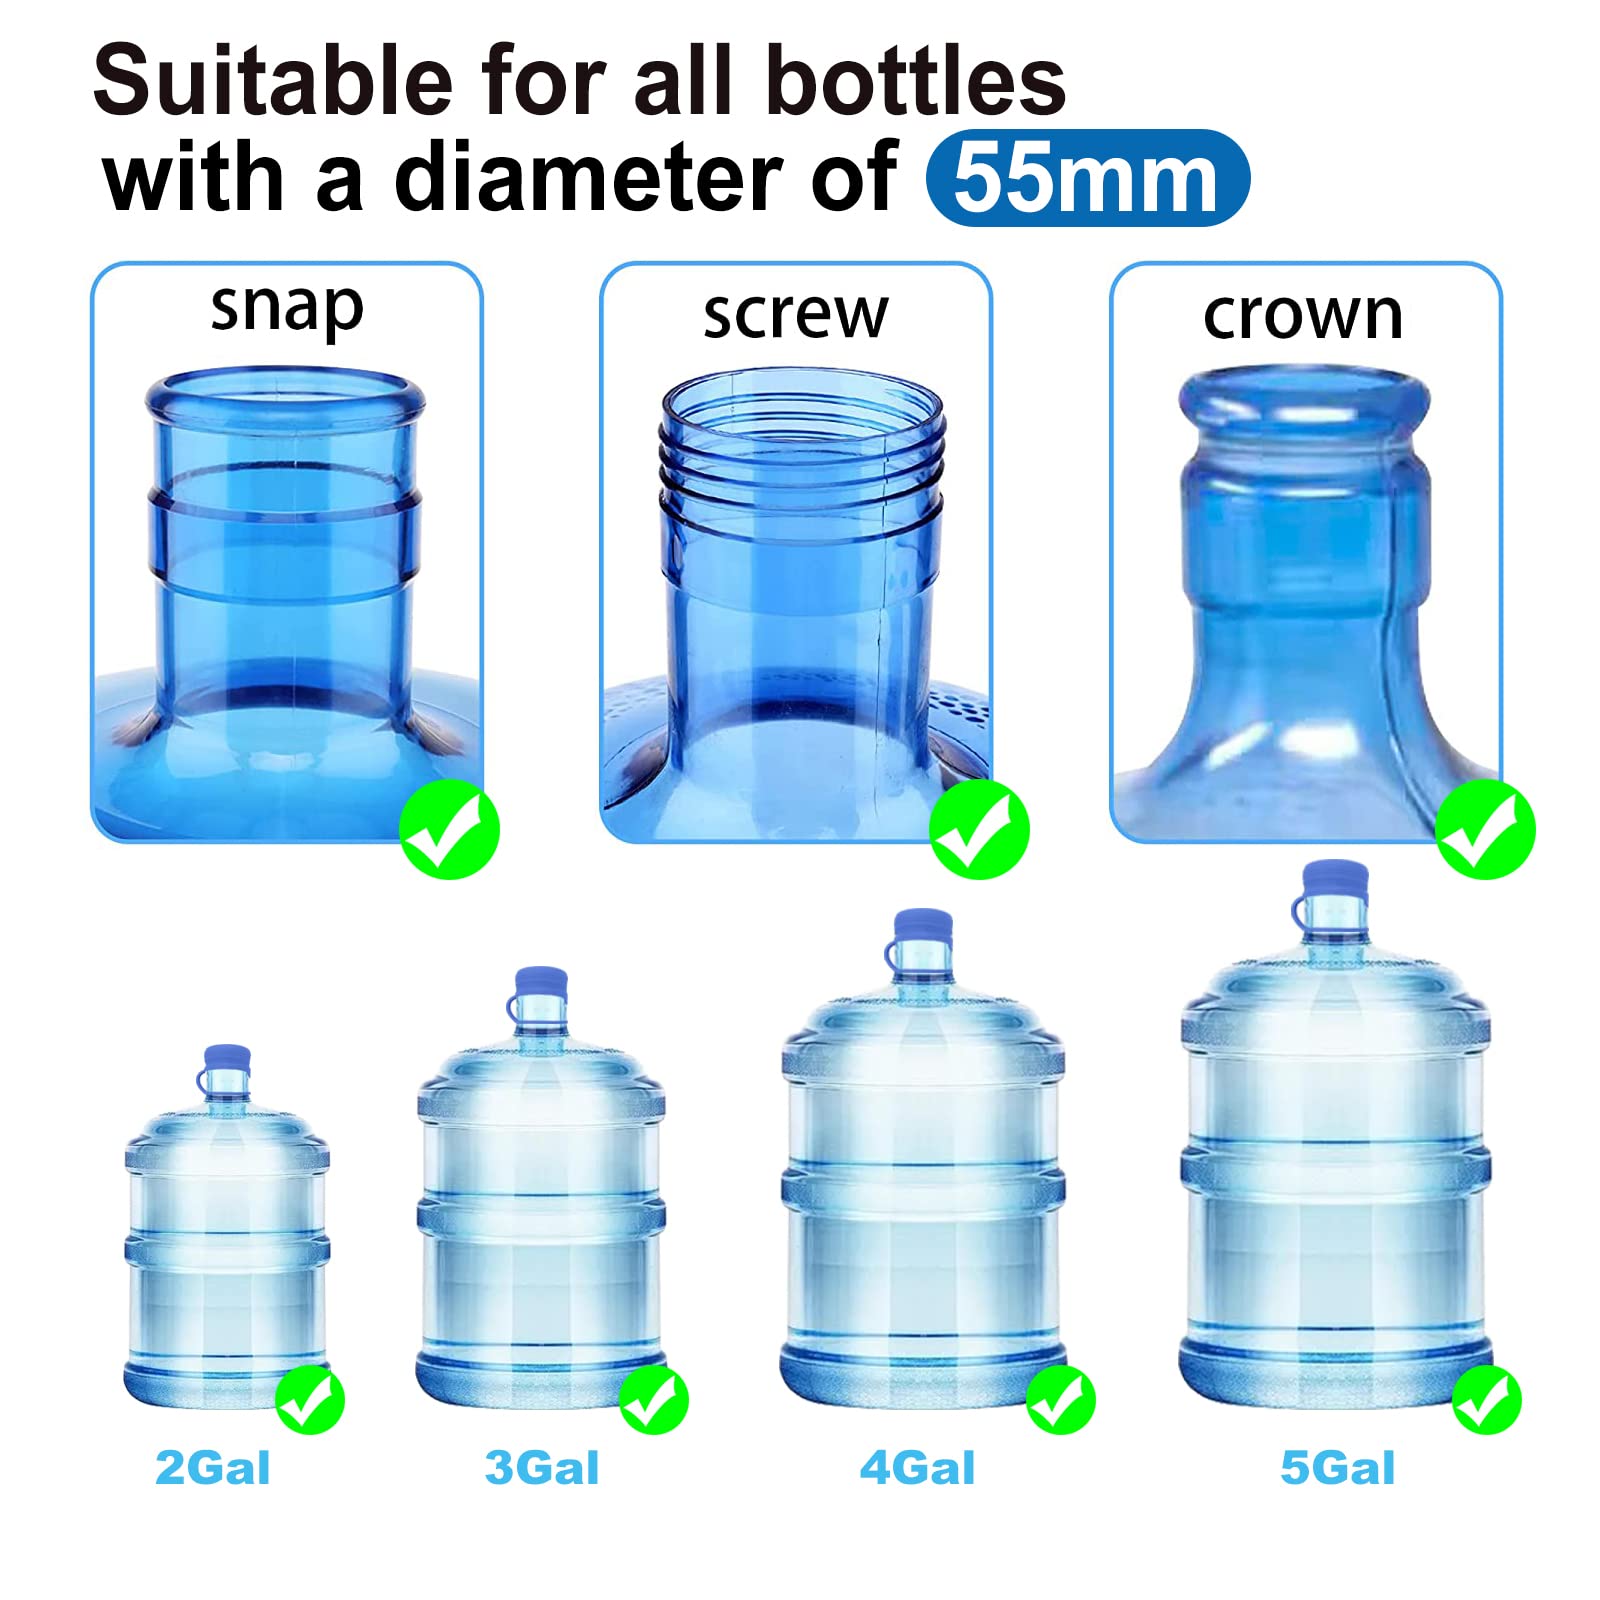 3 & 5 Gallon Water Jug Cap Reusable, Food Grade Silicone Replacement Gallon Caps for 55mm Standard/Screw/Crown Tops Water Bottle and Water Dispensers, Non-Spill Lids for Anti-Splash, Leak Free (3PCS)